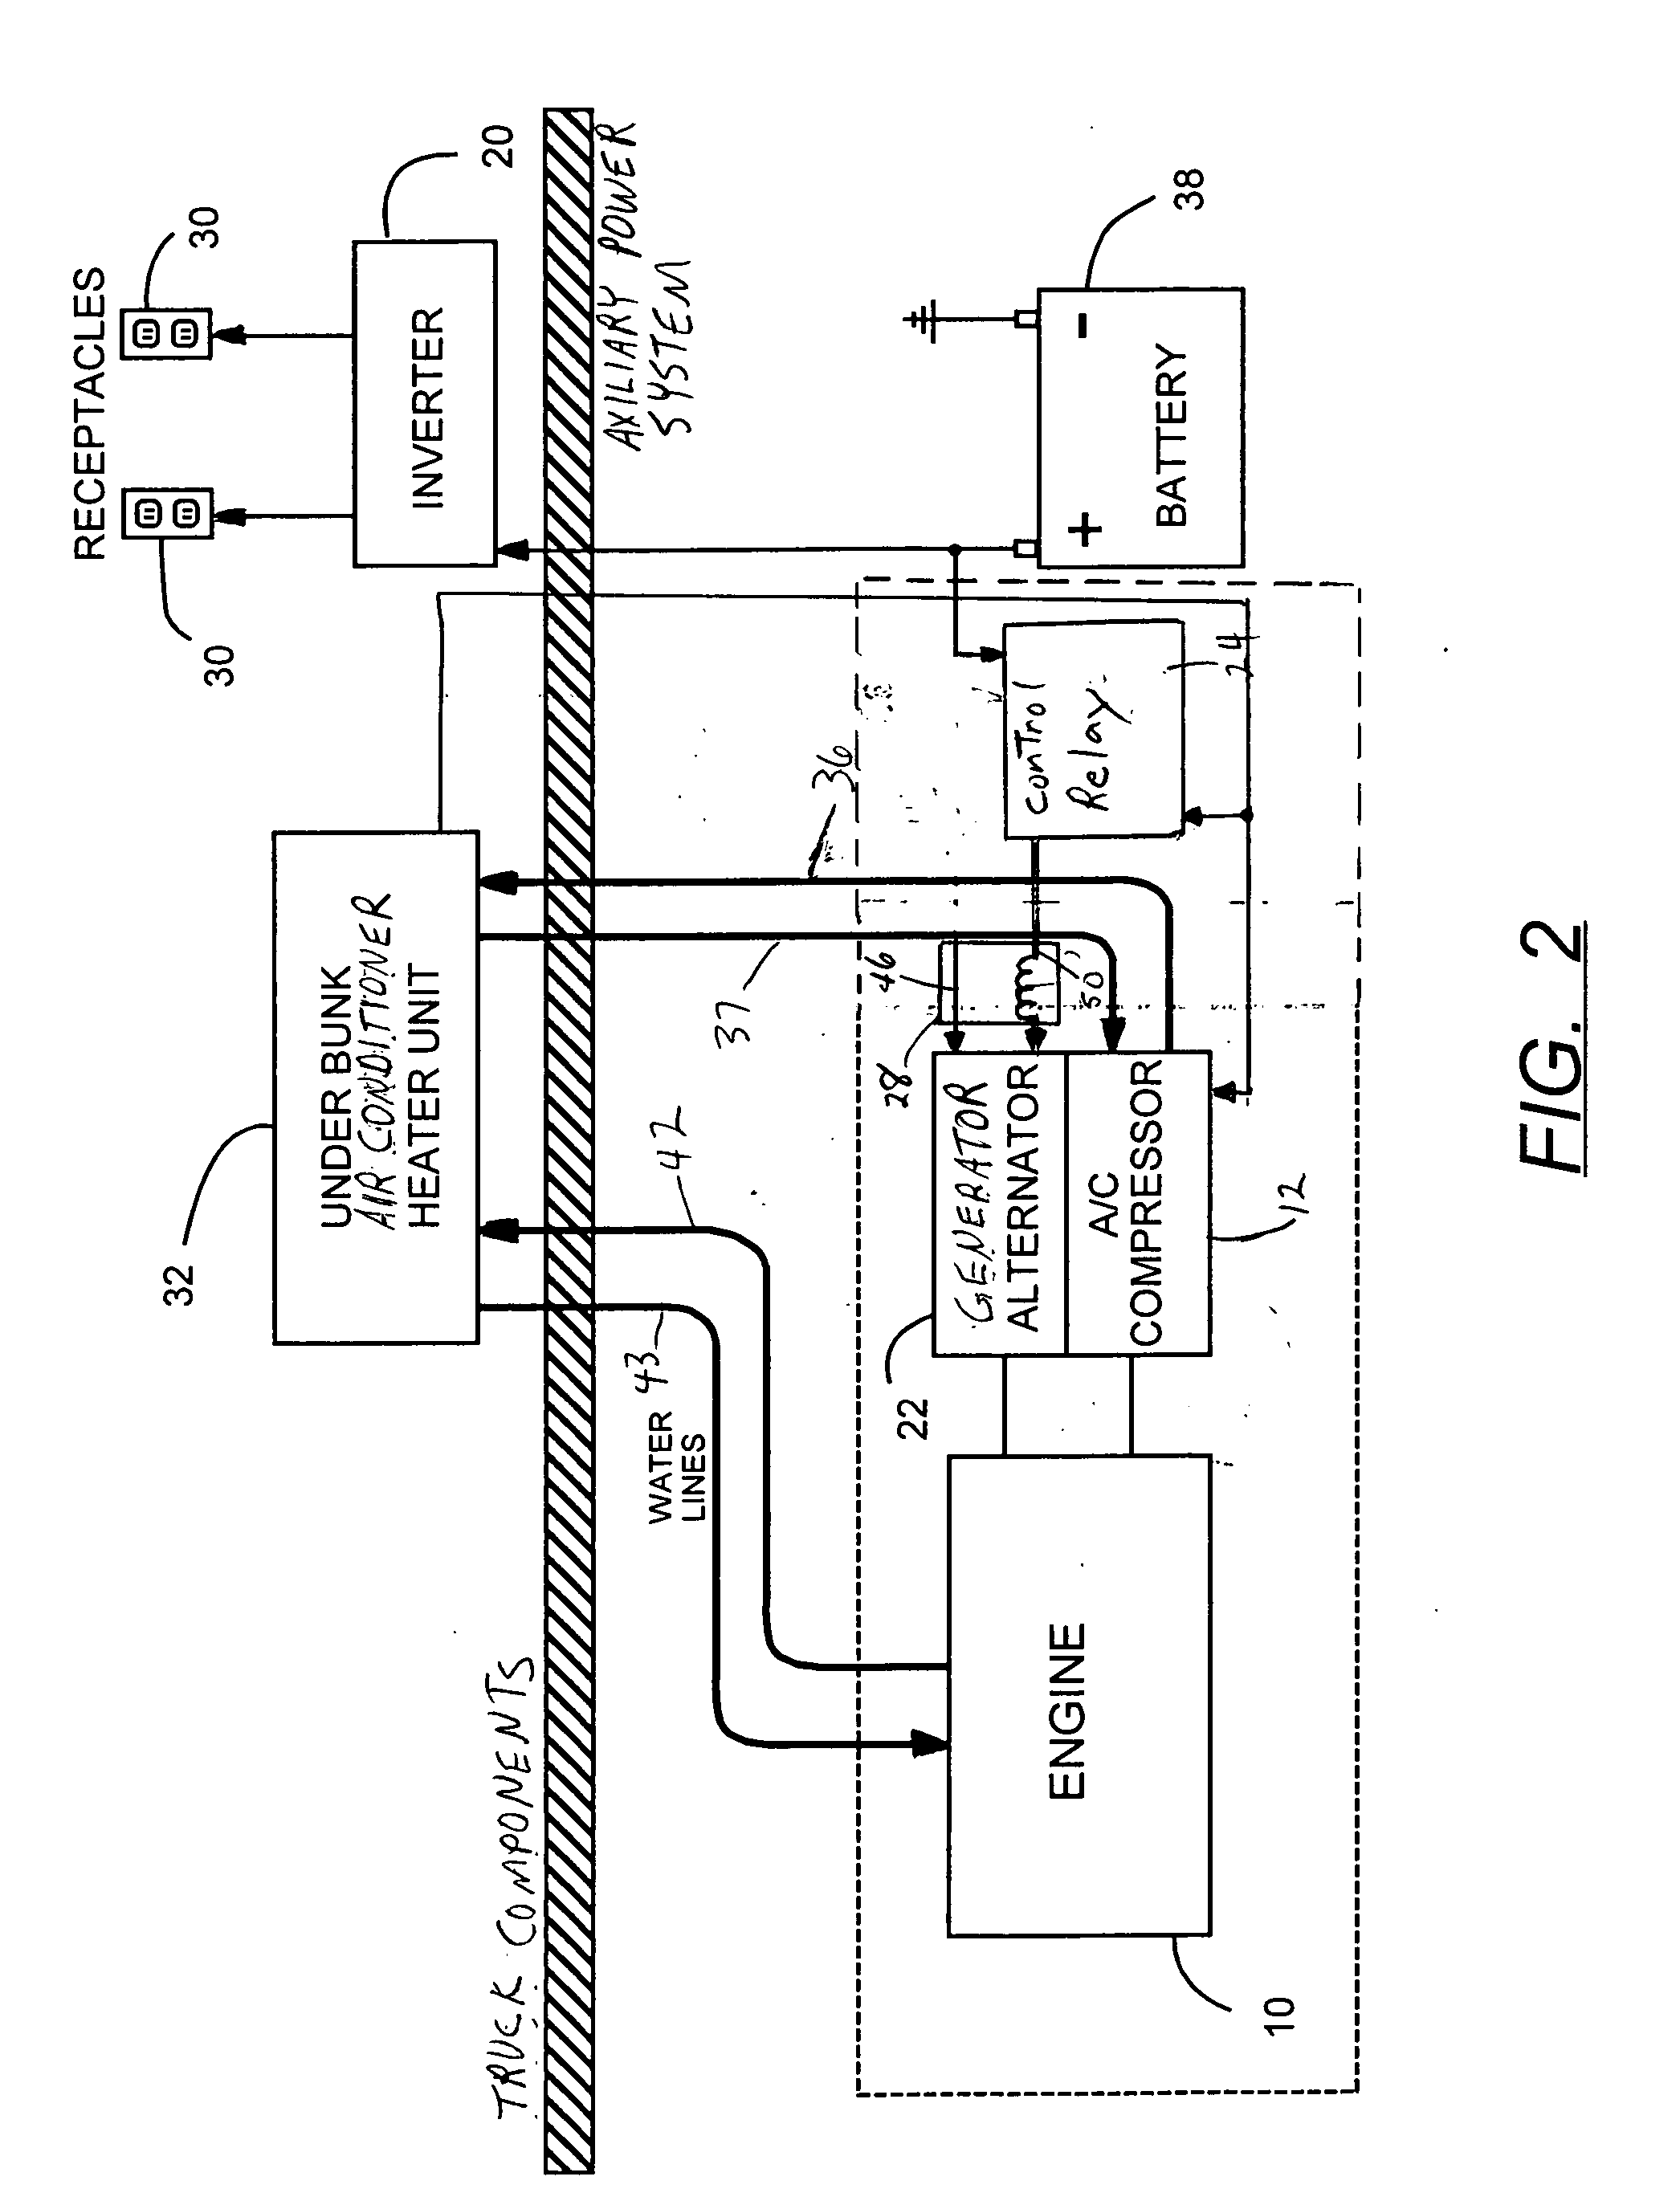 Load management auxiliary power system